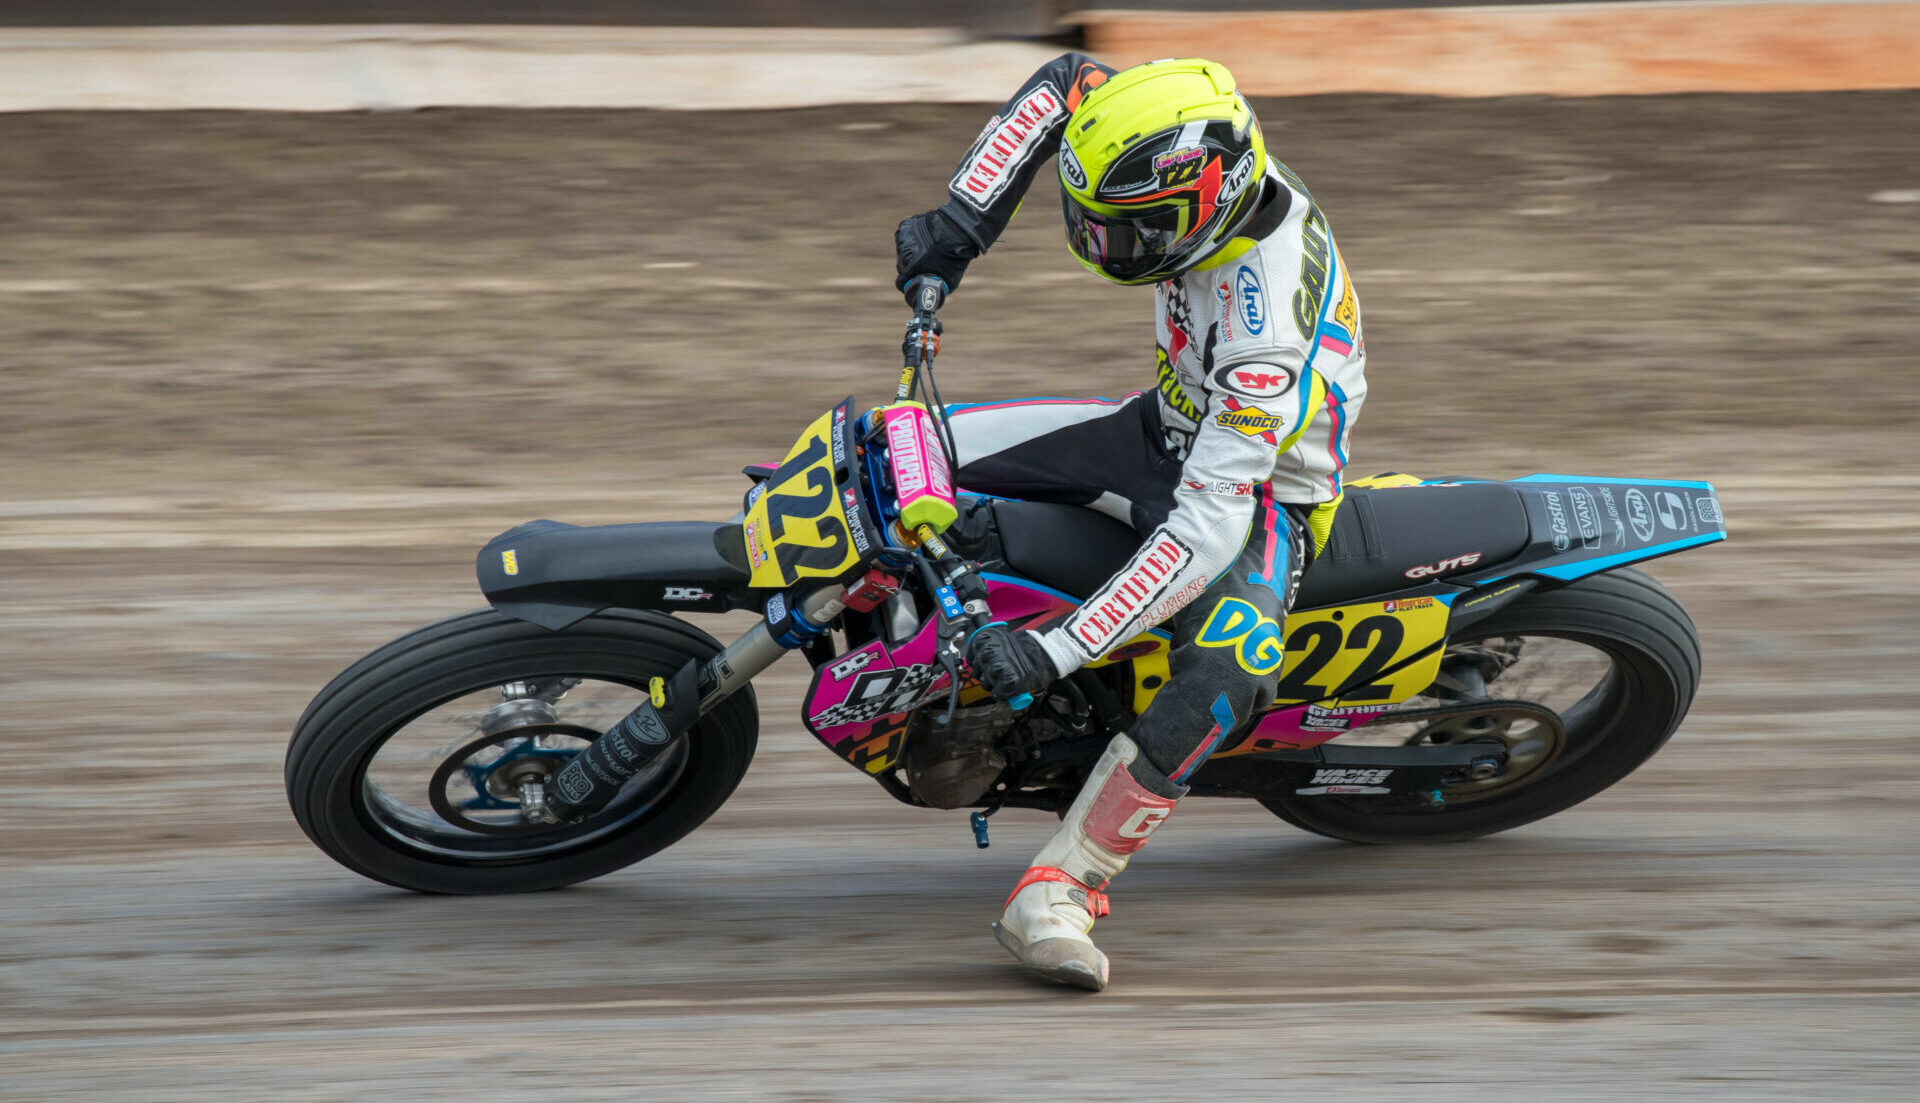 Dalton Gauthier (122) at speed on his D&D Cycles Husqvarna in 2019, when he won the AFT Singles Championship. Photo by Scott Hunter, courtesy AFT.